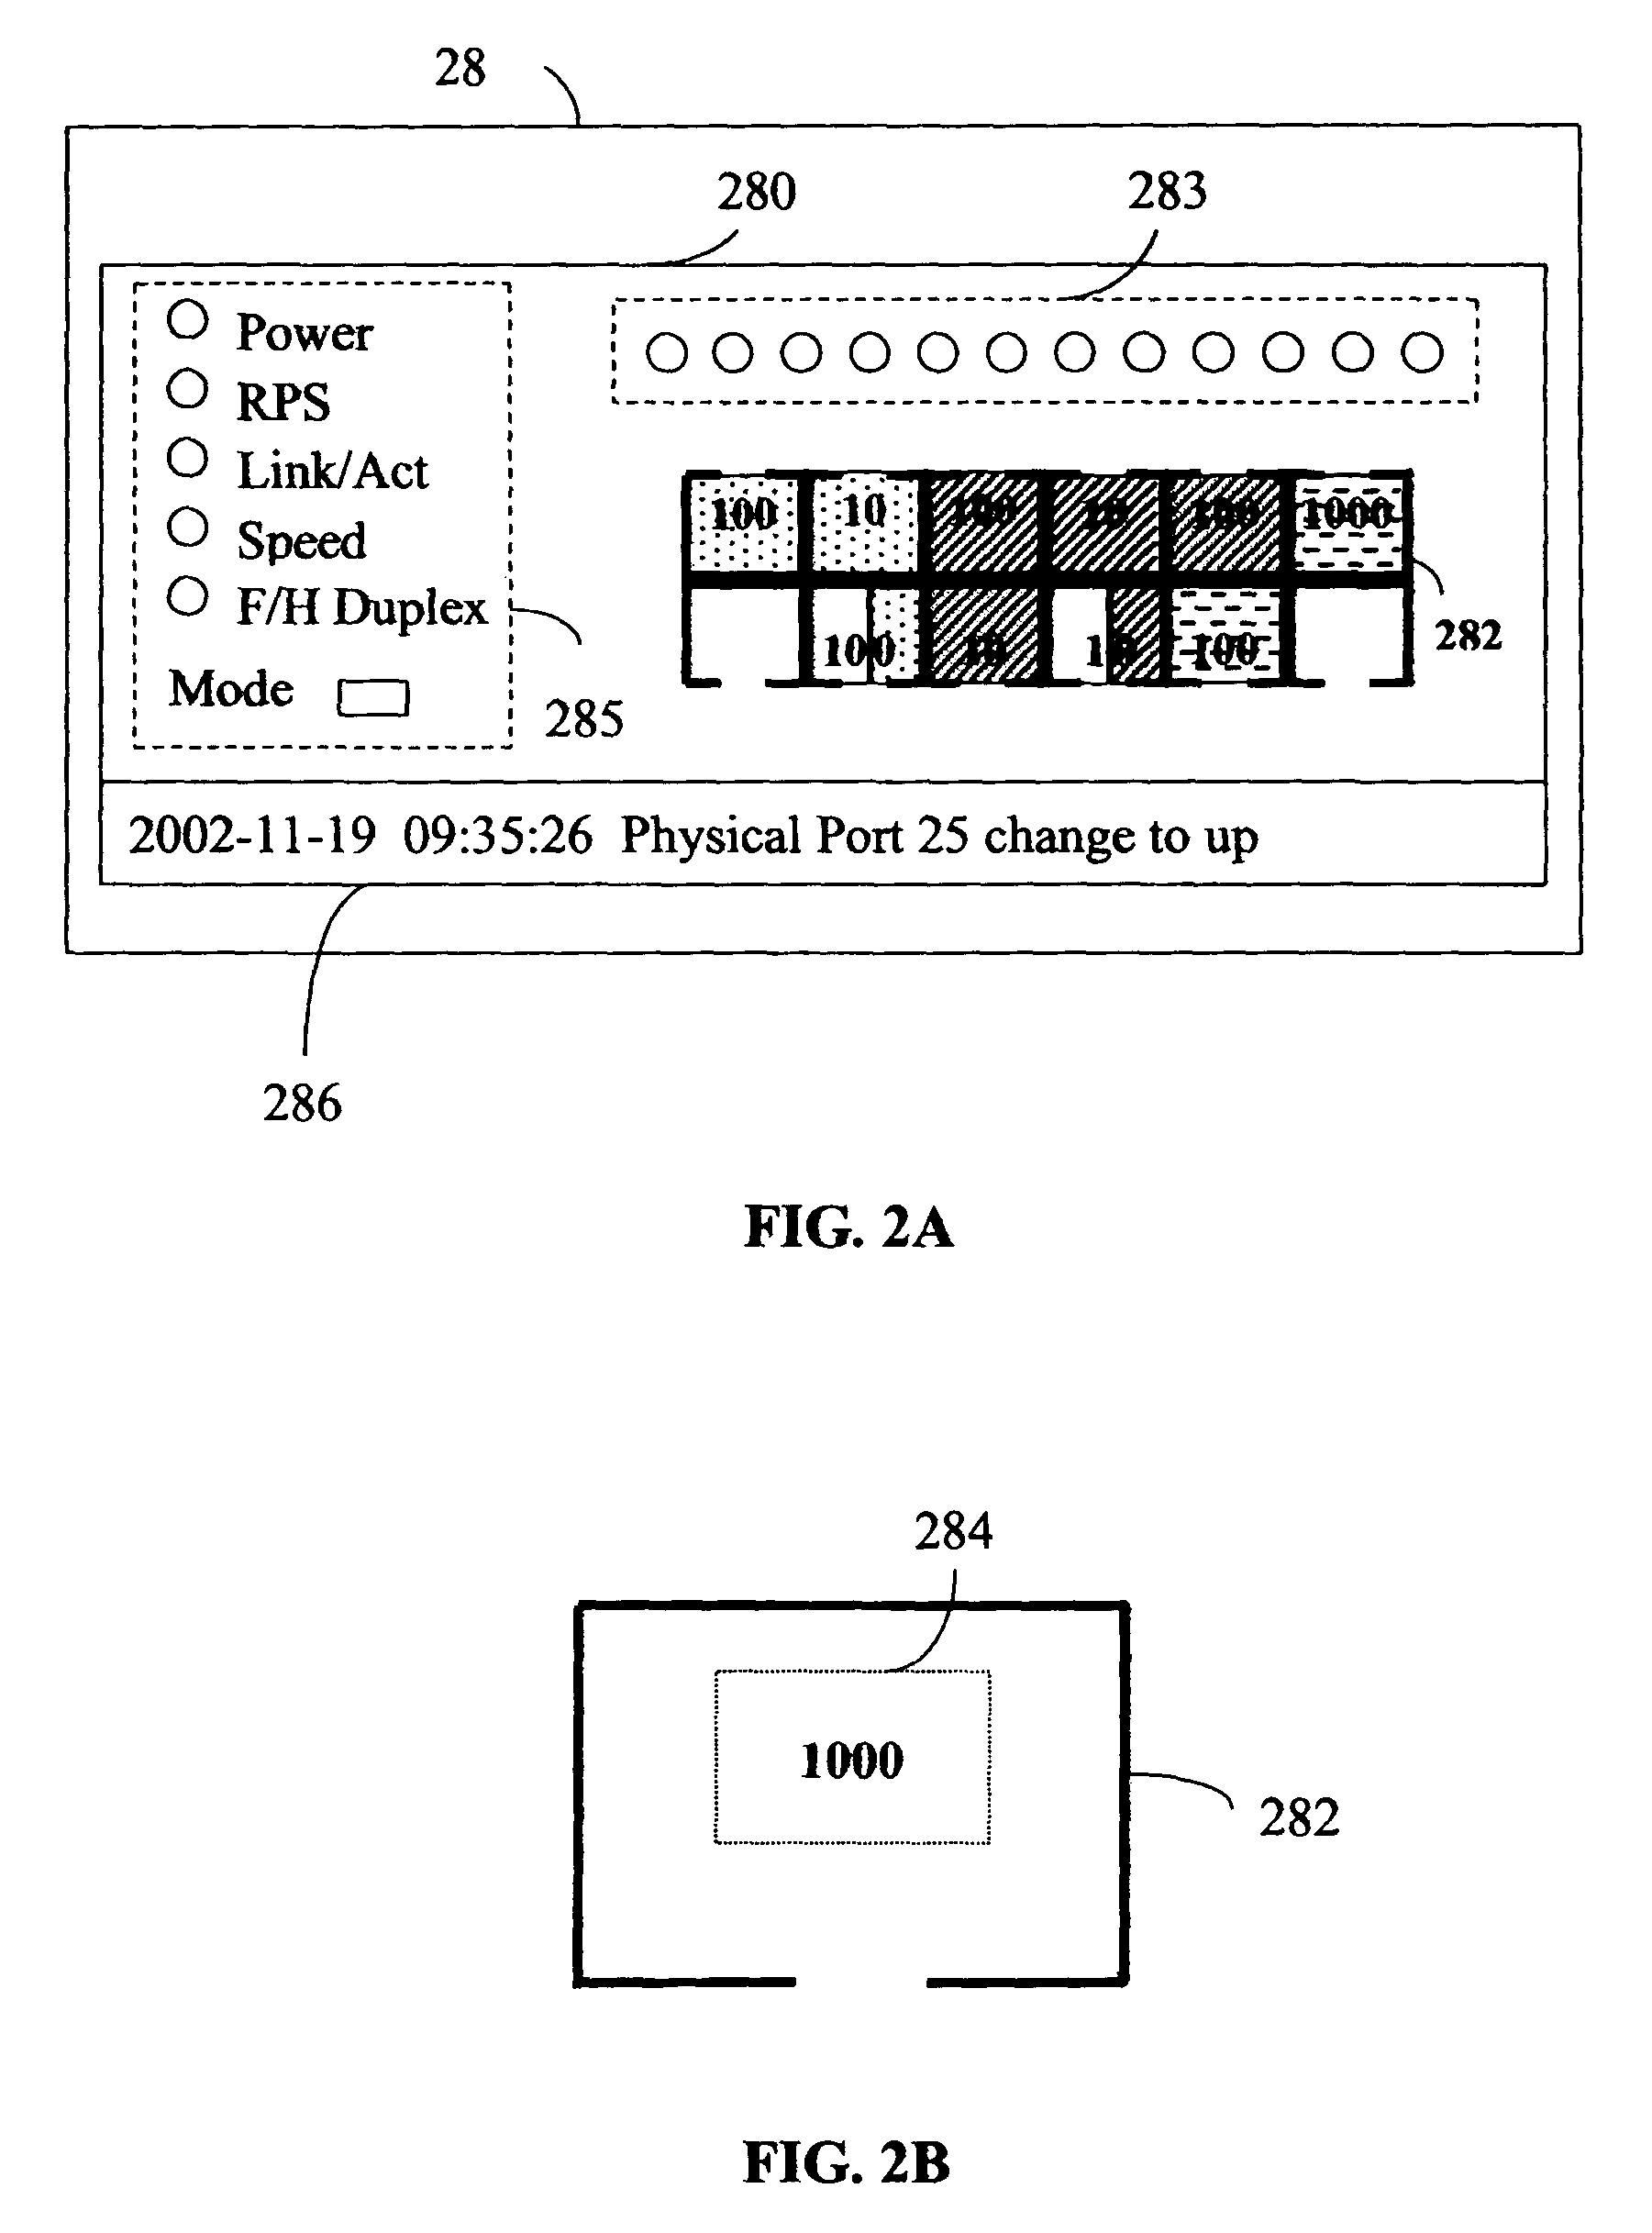 Port information display system and method for displaying port performance of network devices